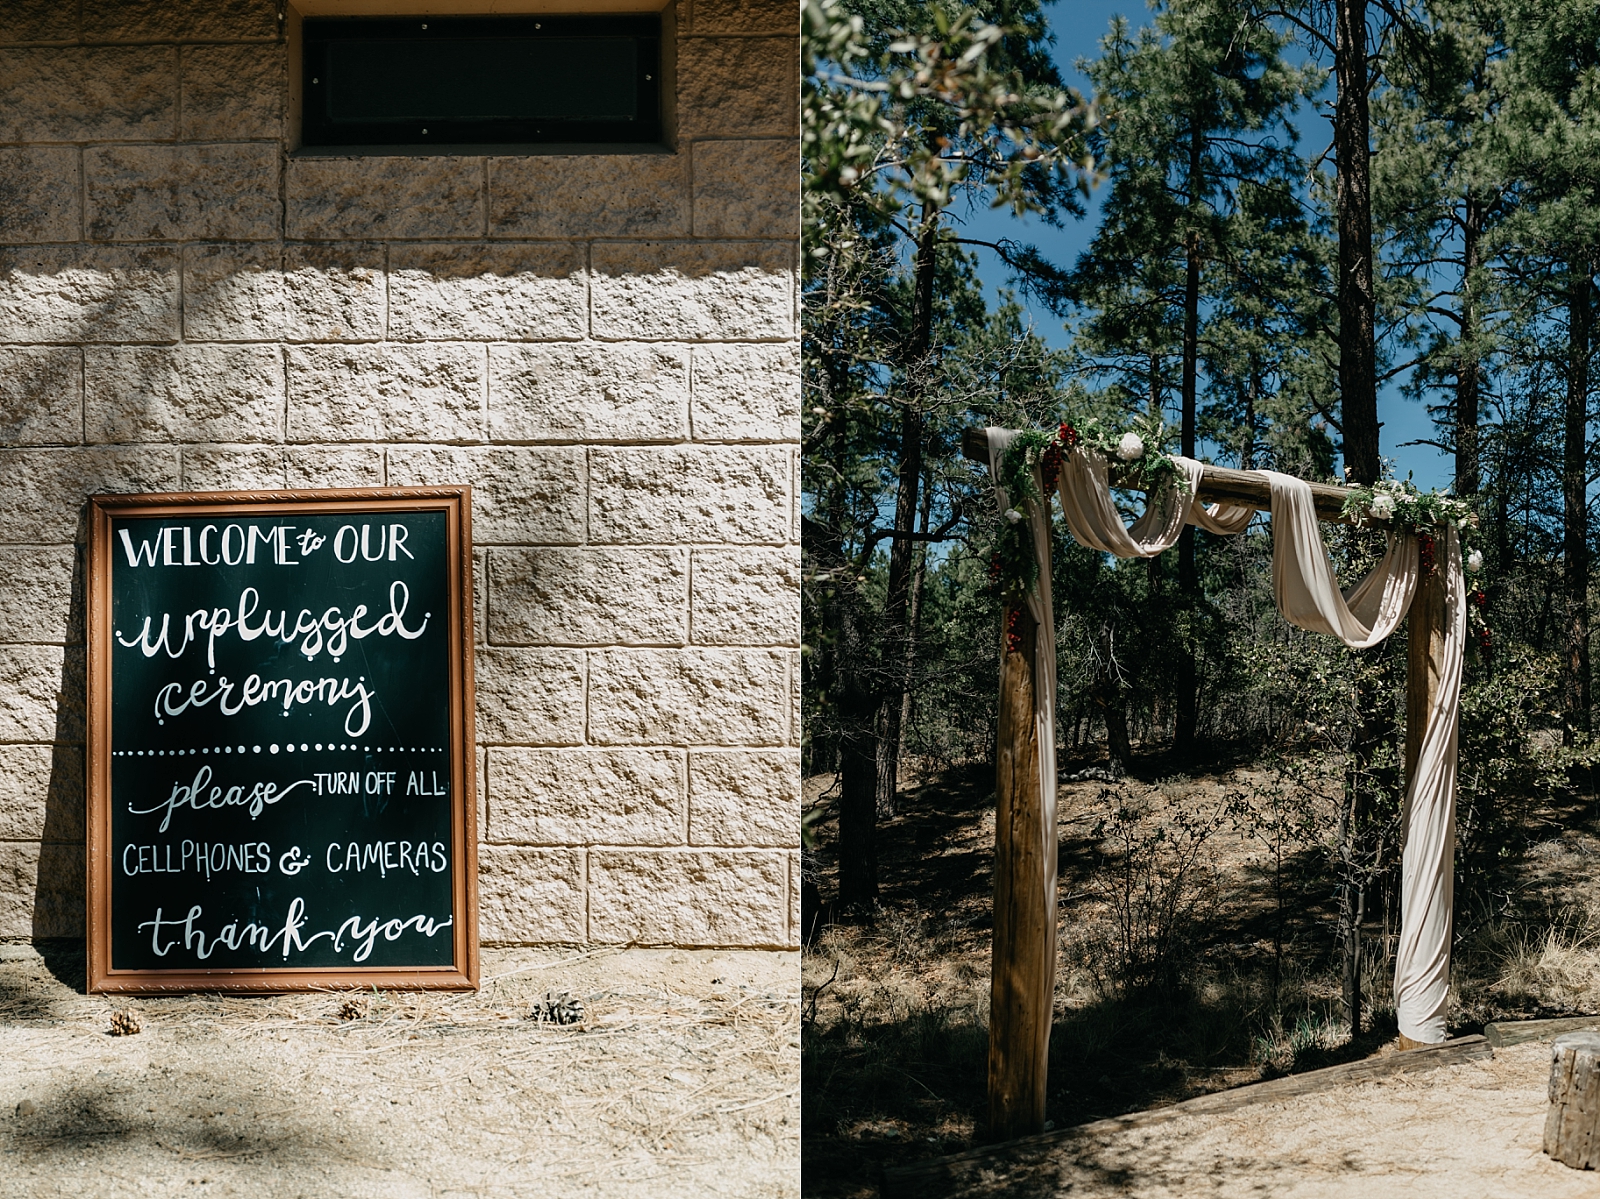 Welcome to our unplugged ceremony please turn off all cellphones and cameras thank you Detail sign cloth draped arch Groom Creek Schoolhouse Wedding Photos Prescott, Arizona Samantha Patri Photography